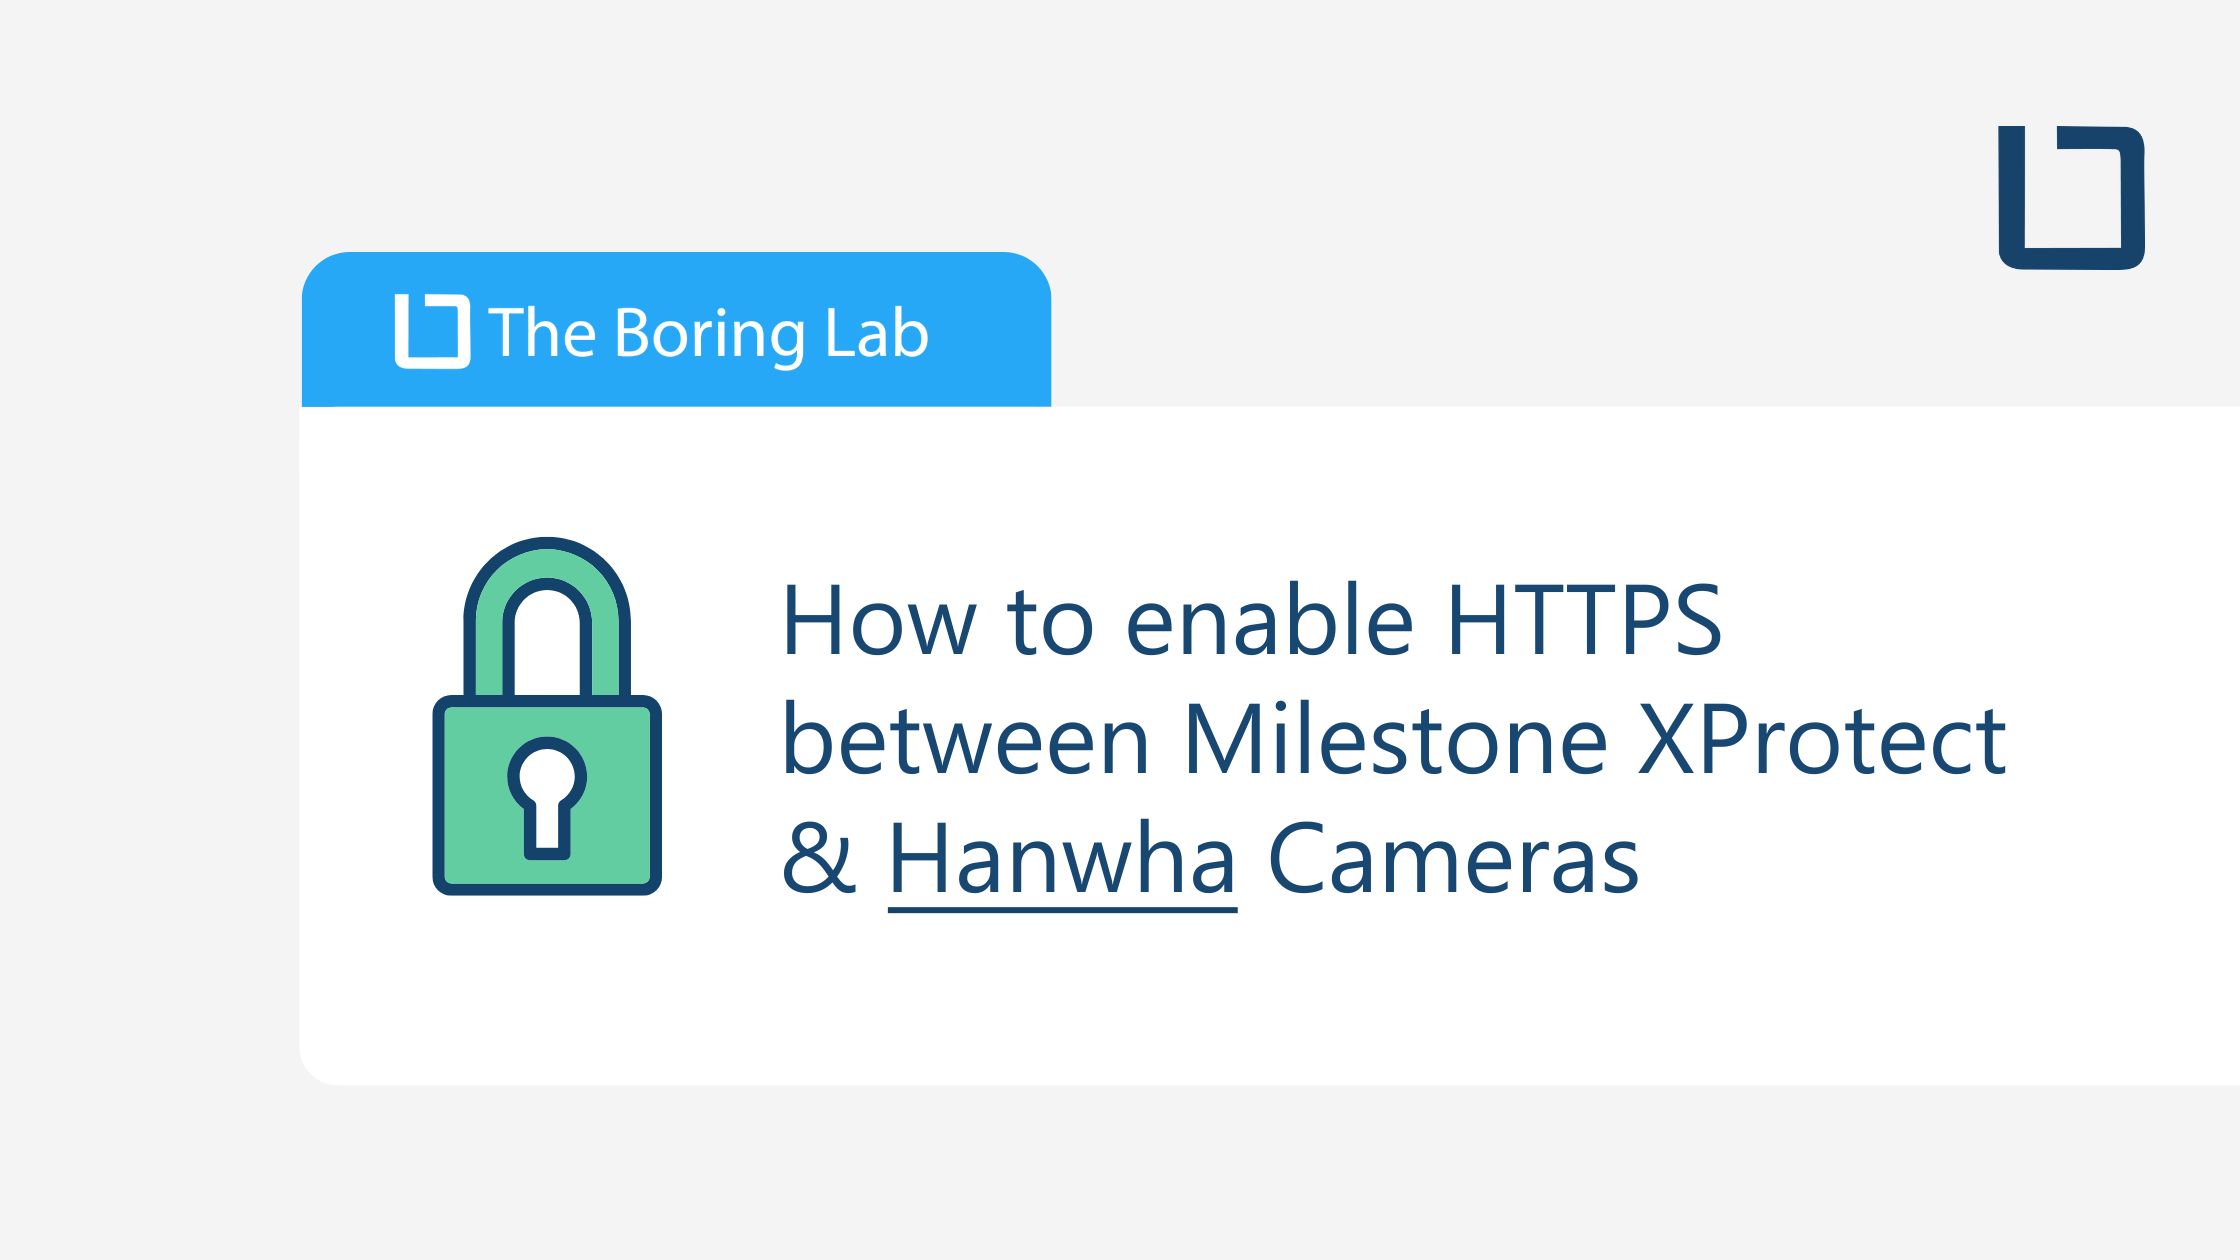 How to Enable HTTPS Between Milestone XProtect & Hanwha Cameras